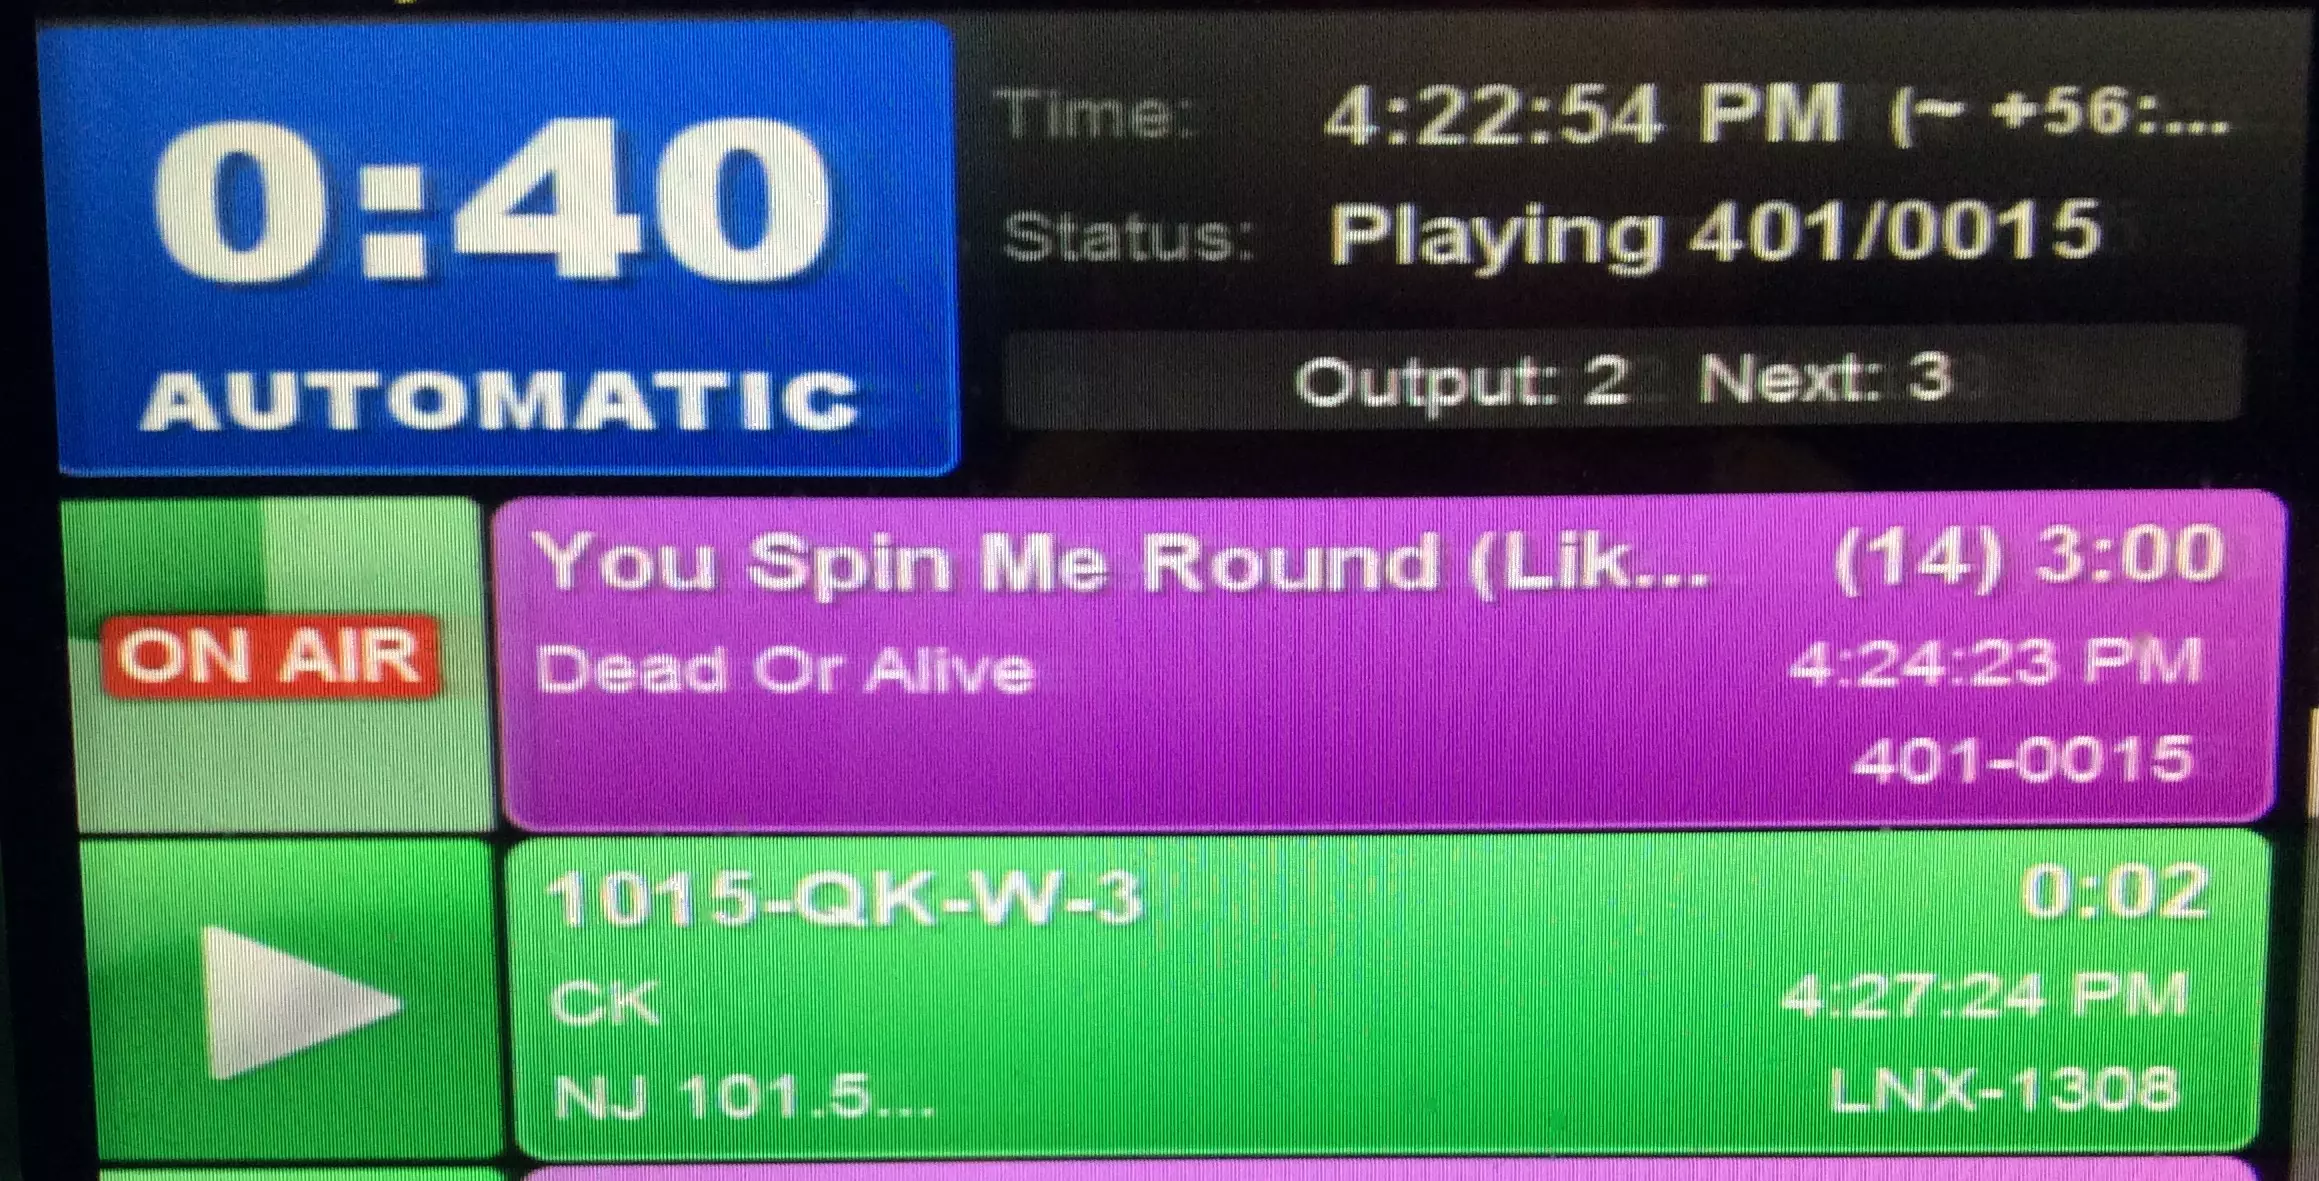 Craig Allen's Fun Facts: You Spin Me Round by Dead Or Alive